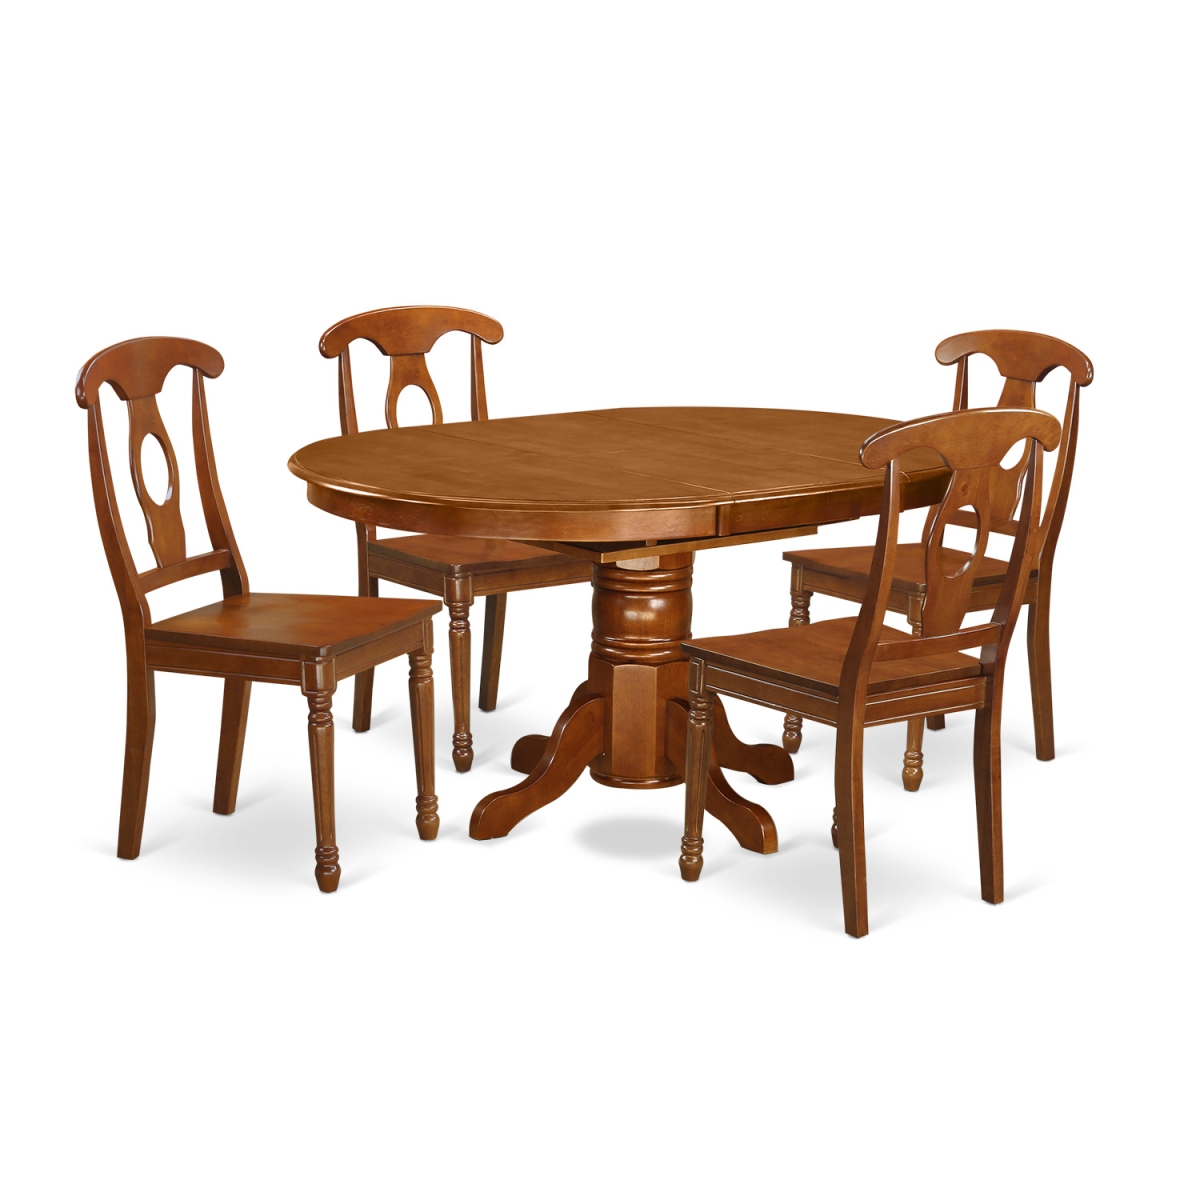 East West Furniture AVNA5-SBR-W Dining Room Table with Leaf & 4 Chairs, Saddle Brown